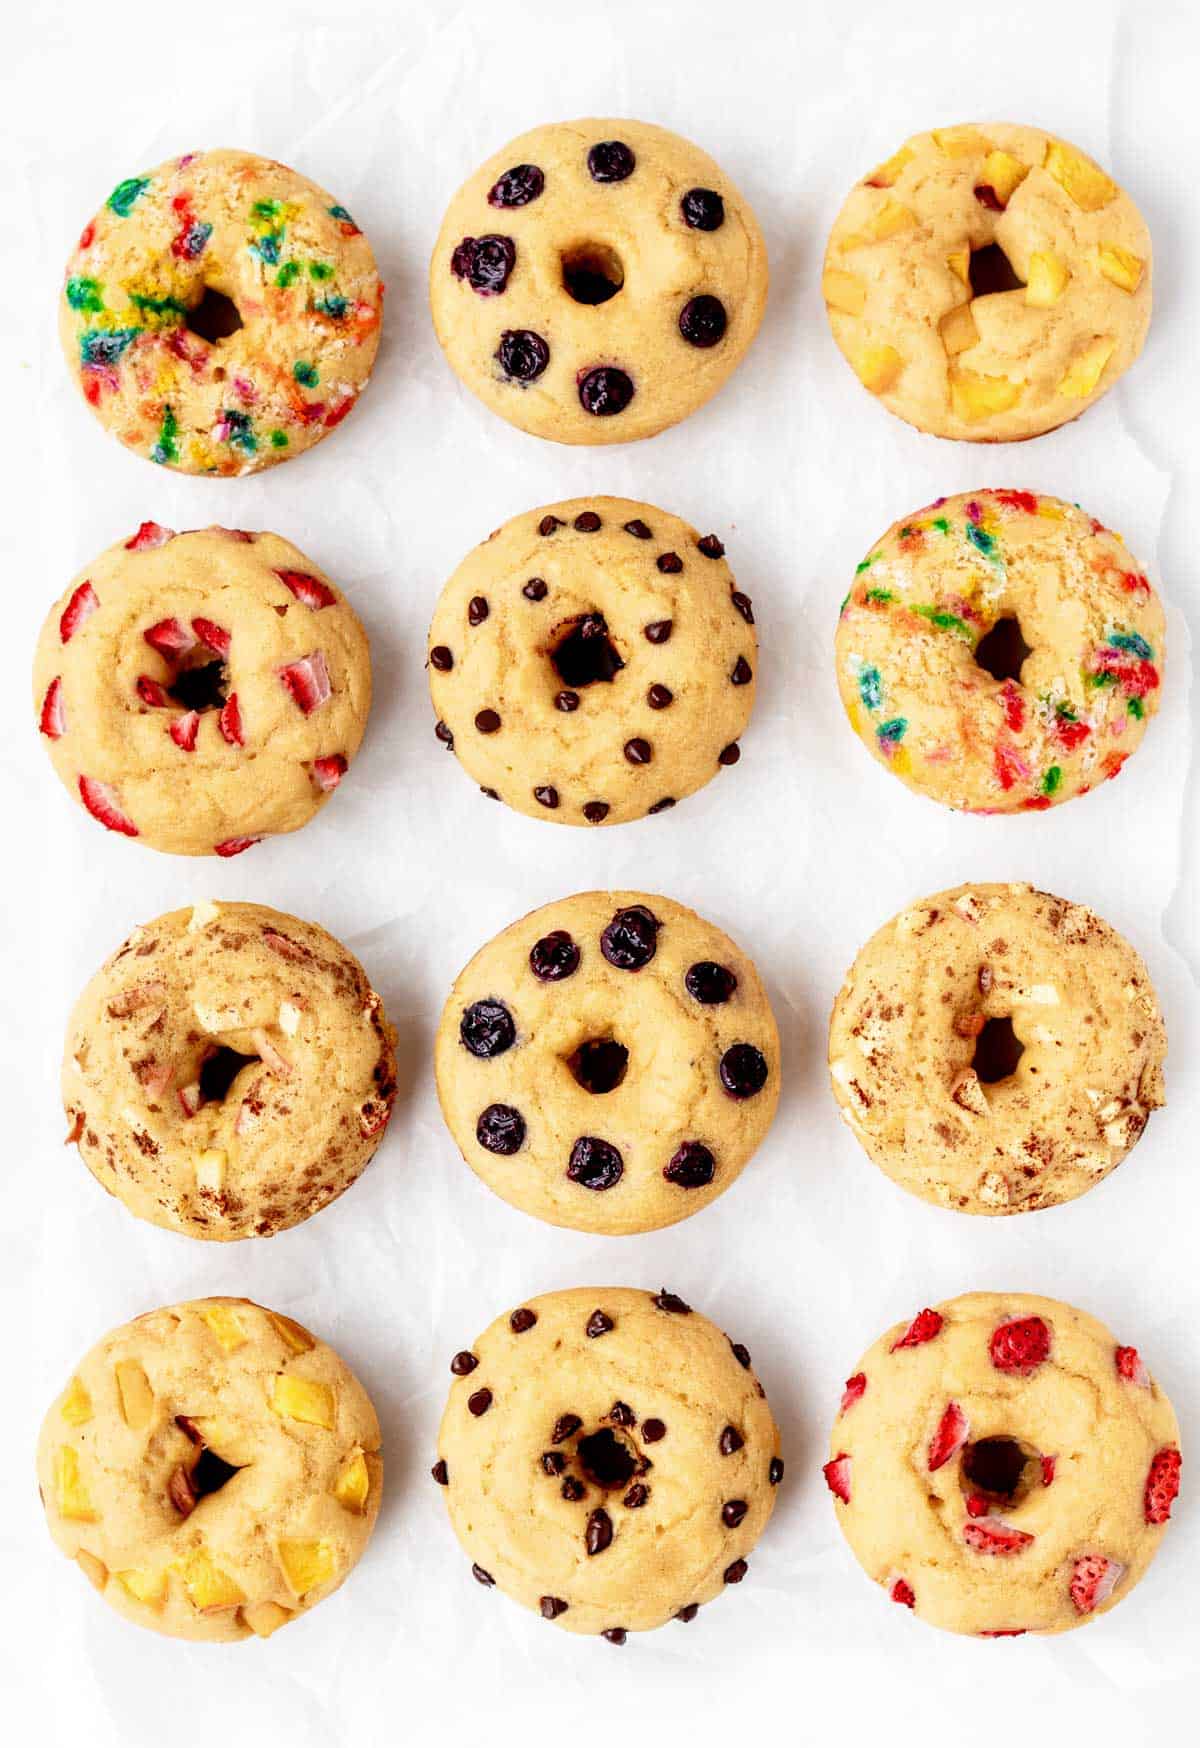 Twelve pancake donuts with different toppings.